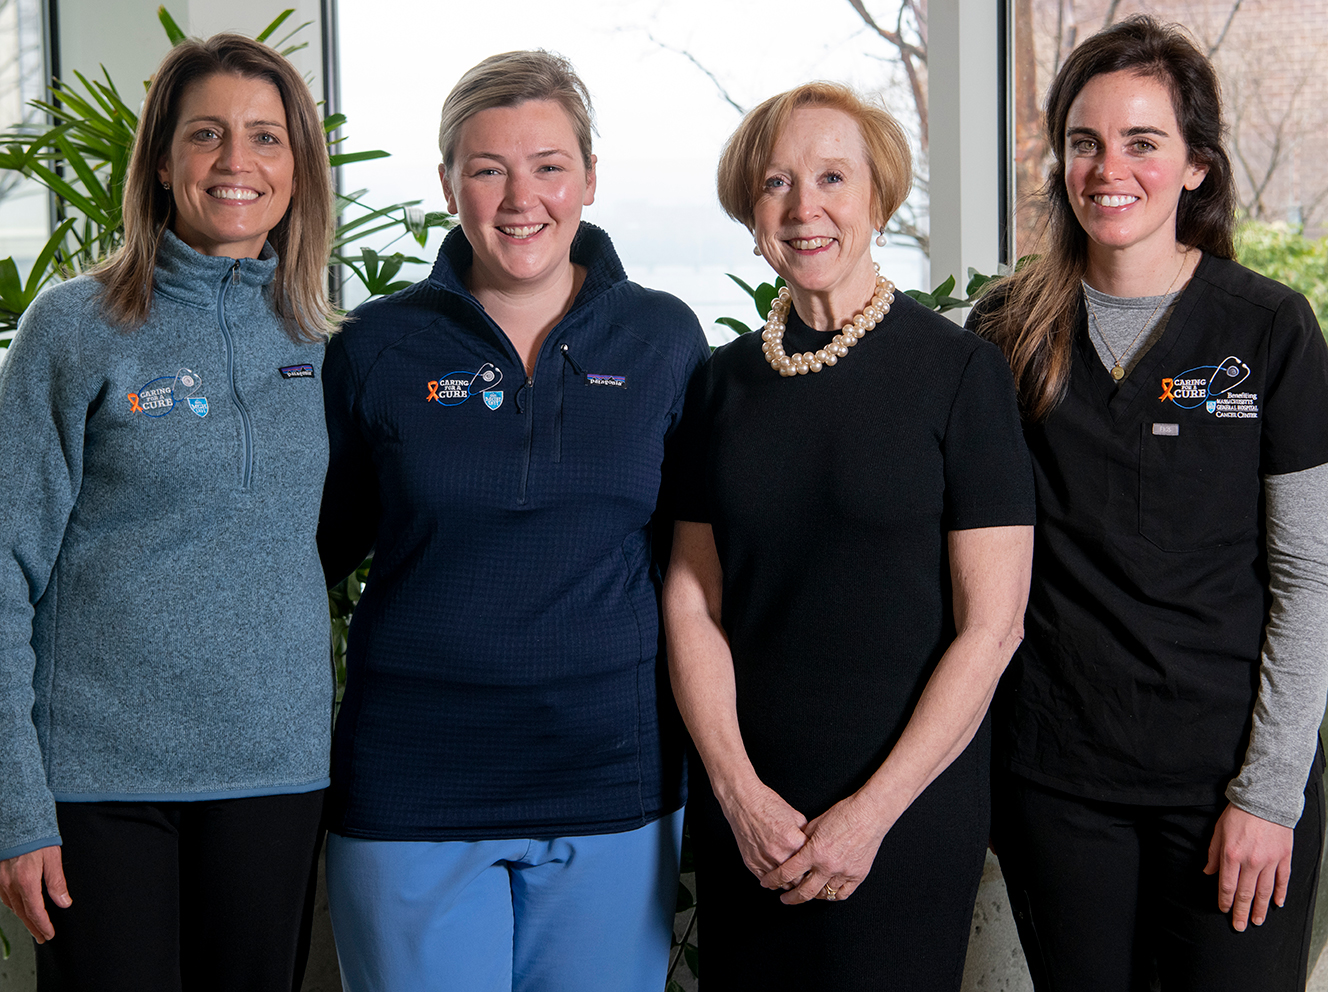 Pictured here with Debbie Burke, RN, DNP, MBA, NEA-BC, senior vice president for patient care and chief nurse at Mass General (2nd from right), are (from left) Caring For A Cure founders and co-directors, Molly Higgins, RN, Laura White, RN and Christine Weiand, RN